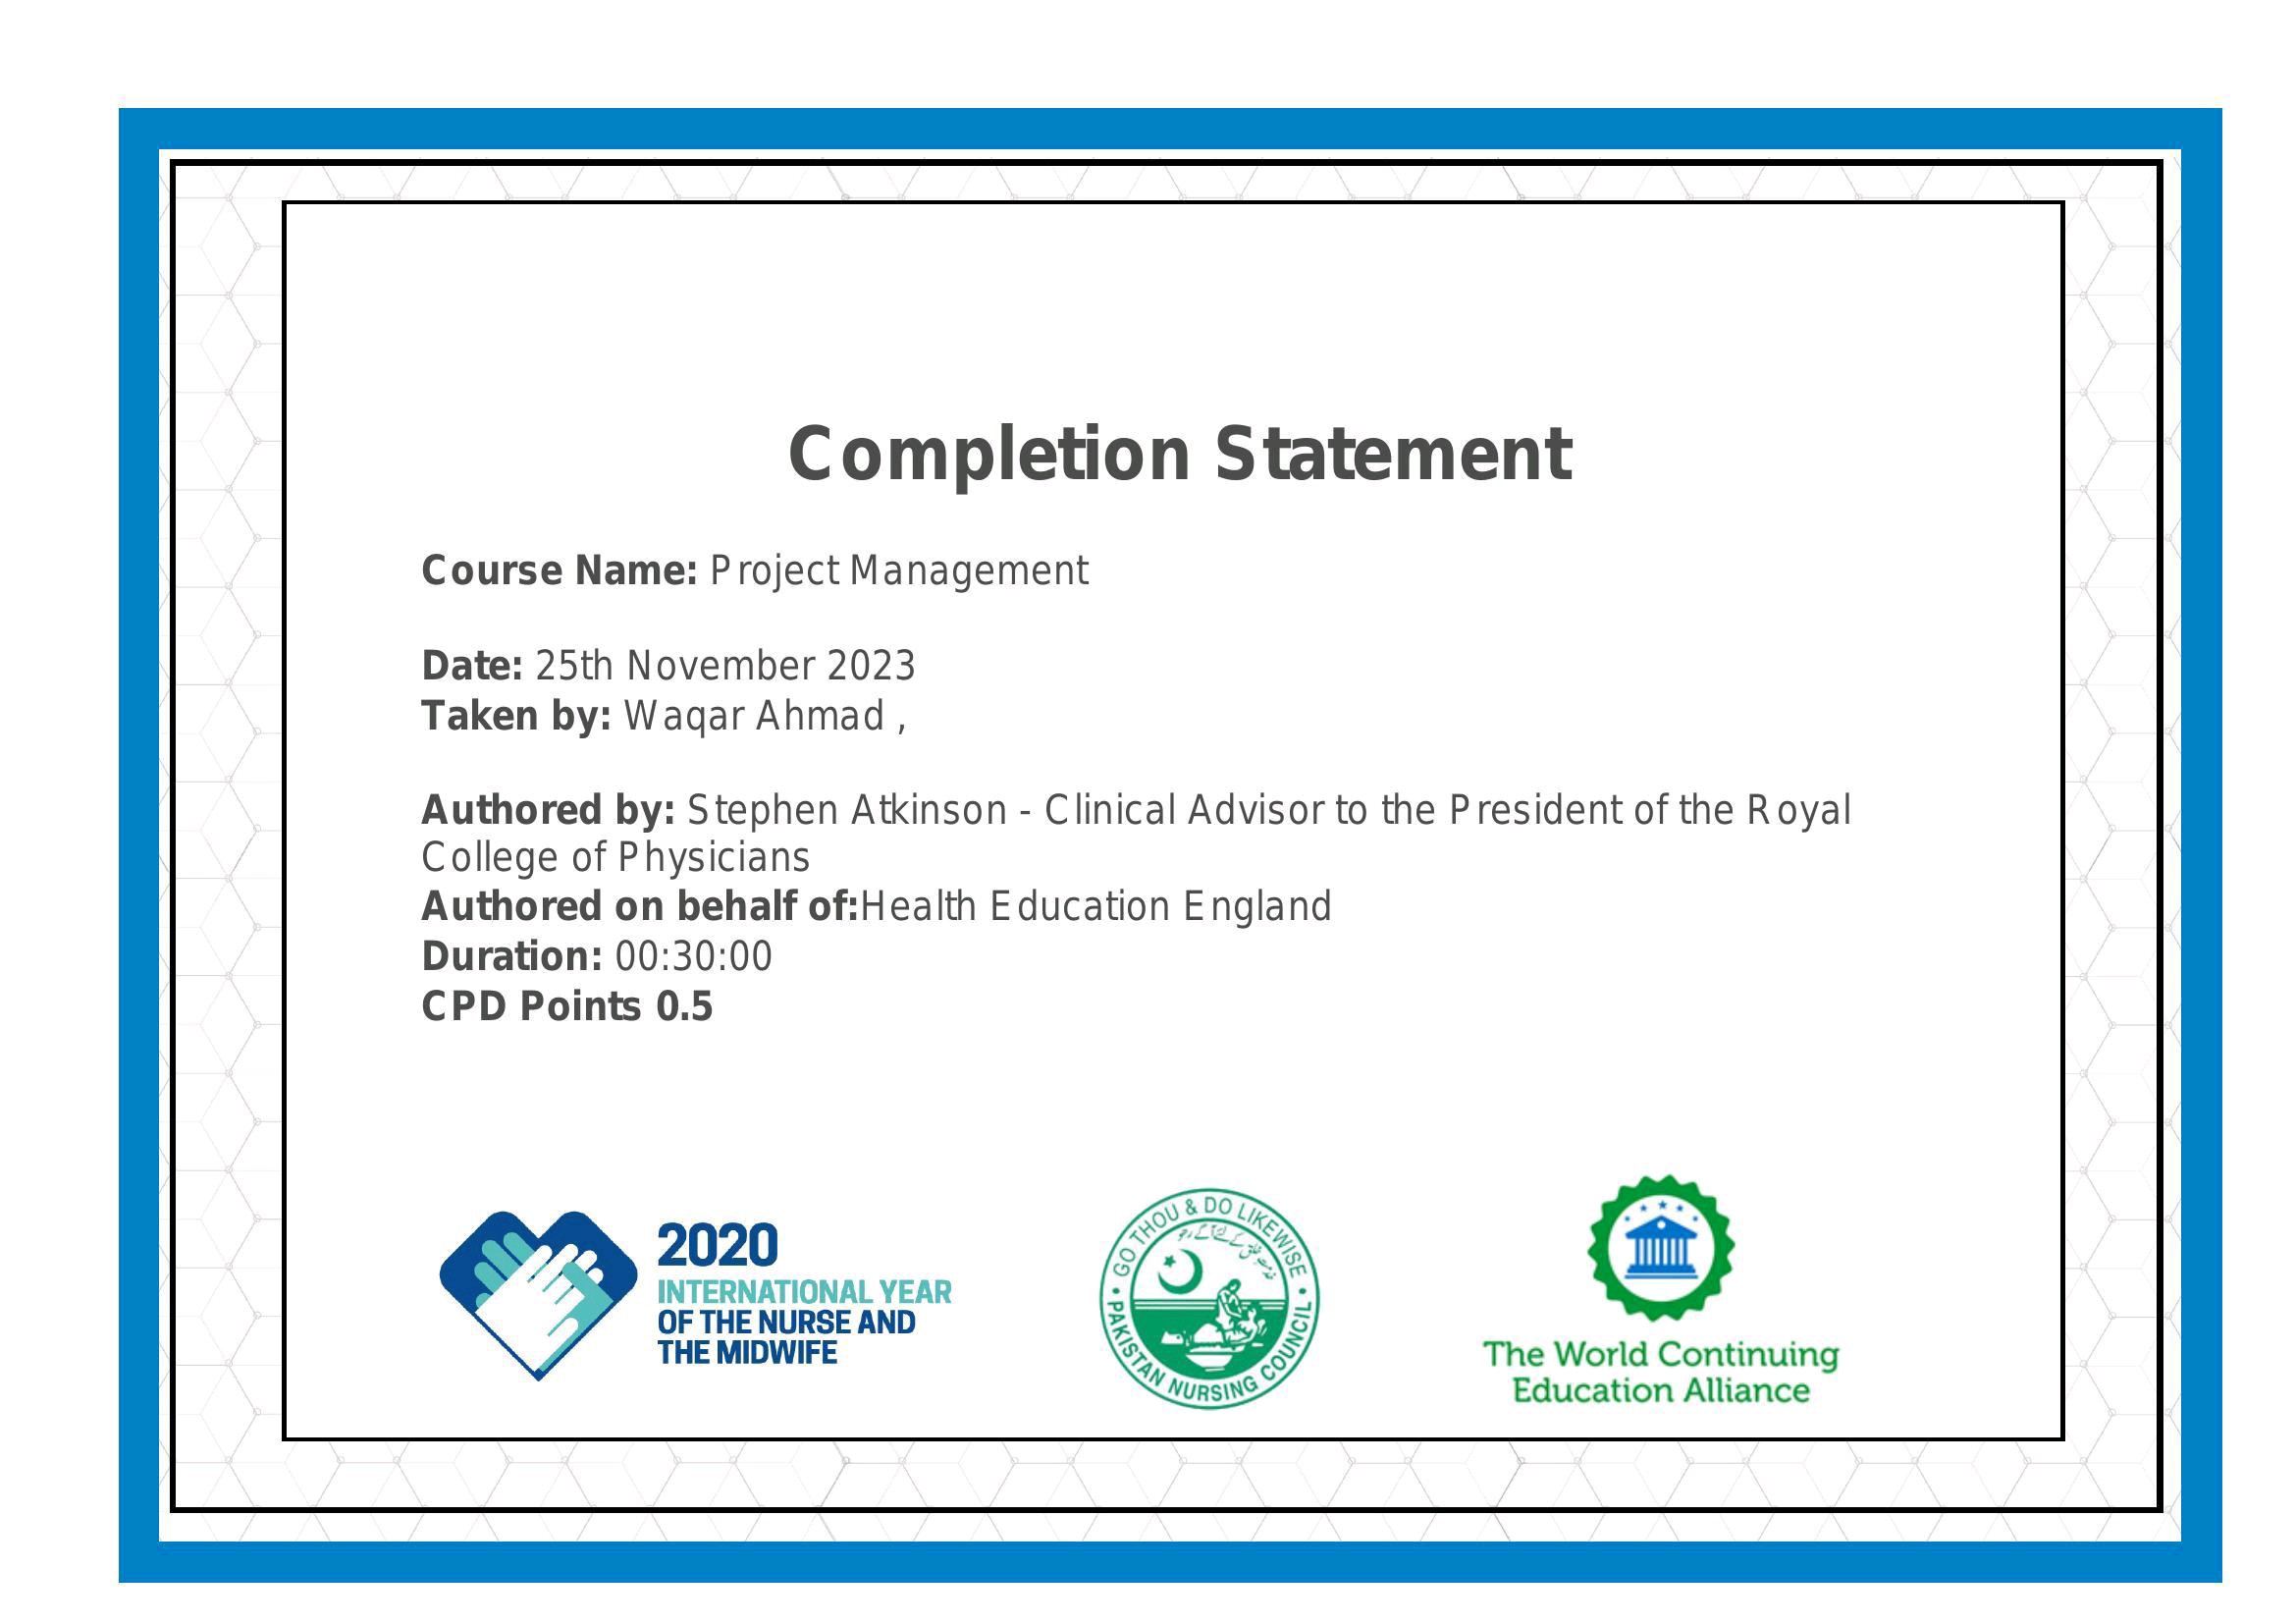 Completion Statement

Course Name: Project Management

Date: 25th November 2023
Taken by: Wagar Ahmad ,

Authored by: Stephen Atkinson - Clinical Advisor to the President of the Royal
College of Physicians

Authored on behalf of:Health Education England

Duration: 00:30:00

CPD Points 0.5

INTERNATIONAL YEAR :

OF THE NURSE AND Ry

THE MIDWIFE : The World Continuing
Education Alliance